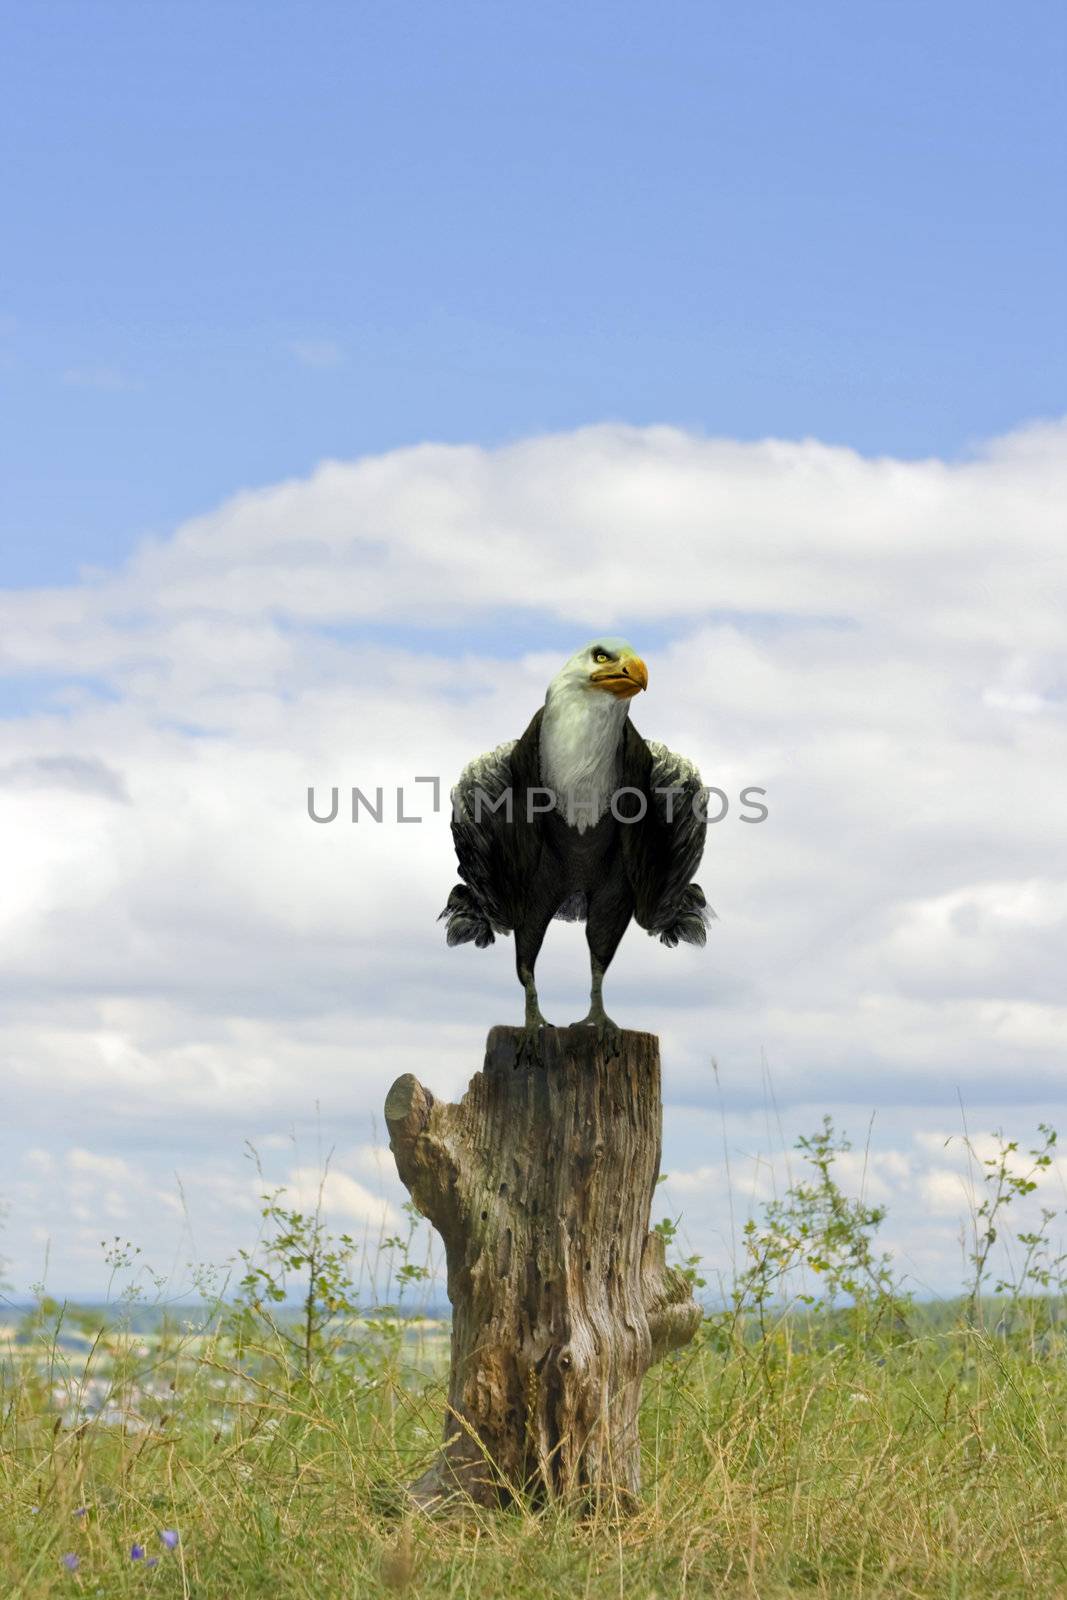 This image shows a stump with a 3d rendered eagle